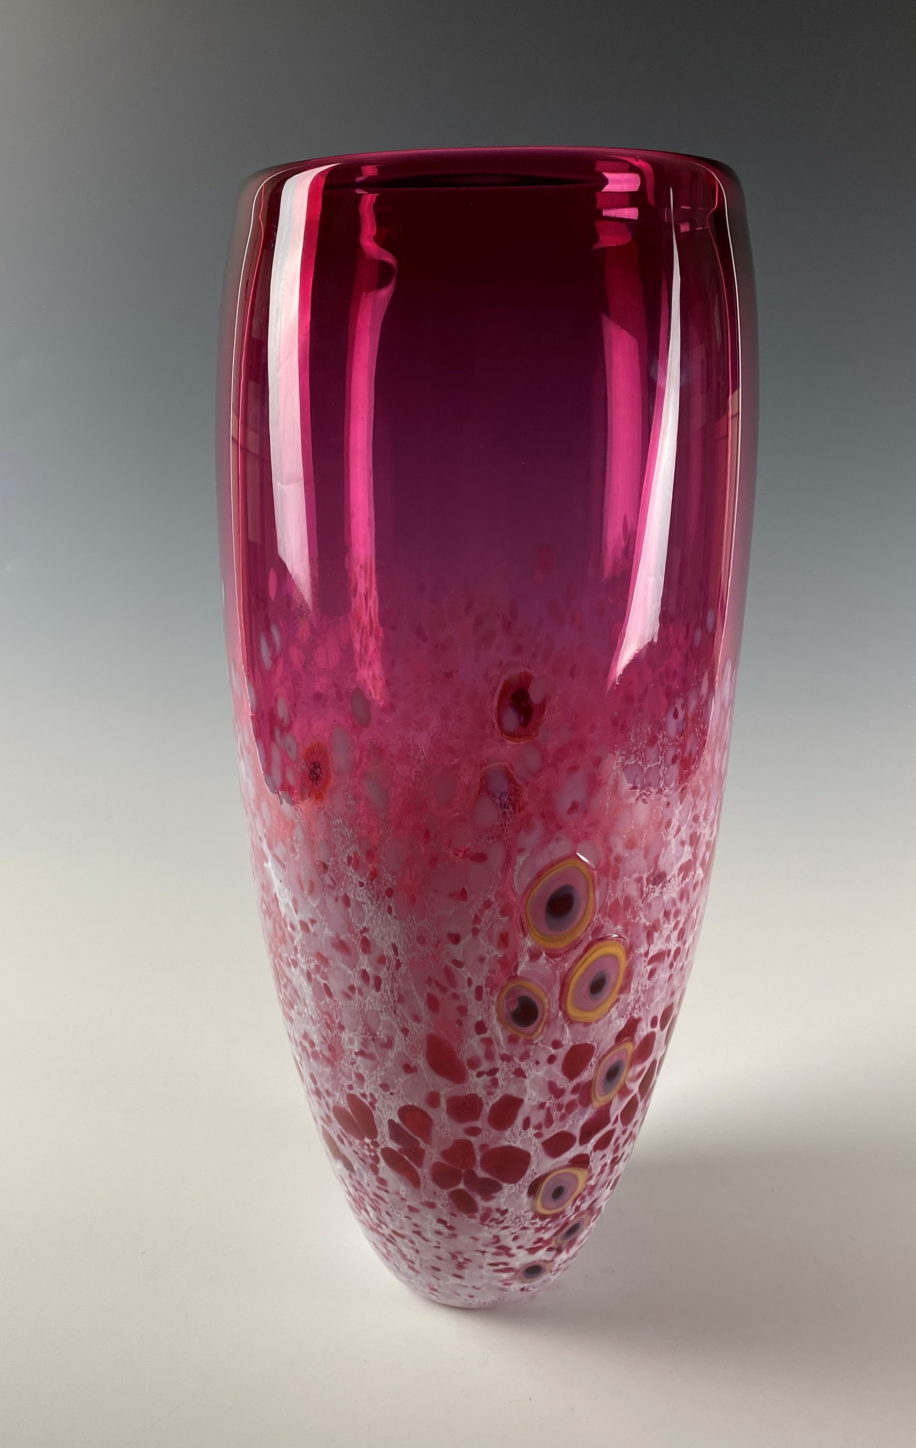 XL Lily Vase (Cranberry) by Lisa Samphire at The Avenue Gallery, a contemporary fine art gallery in Victoria, BC, Canada.